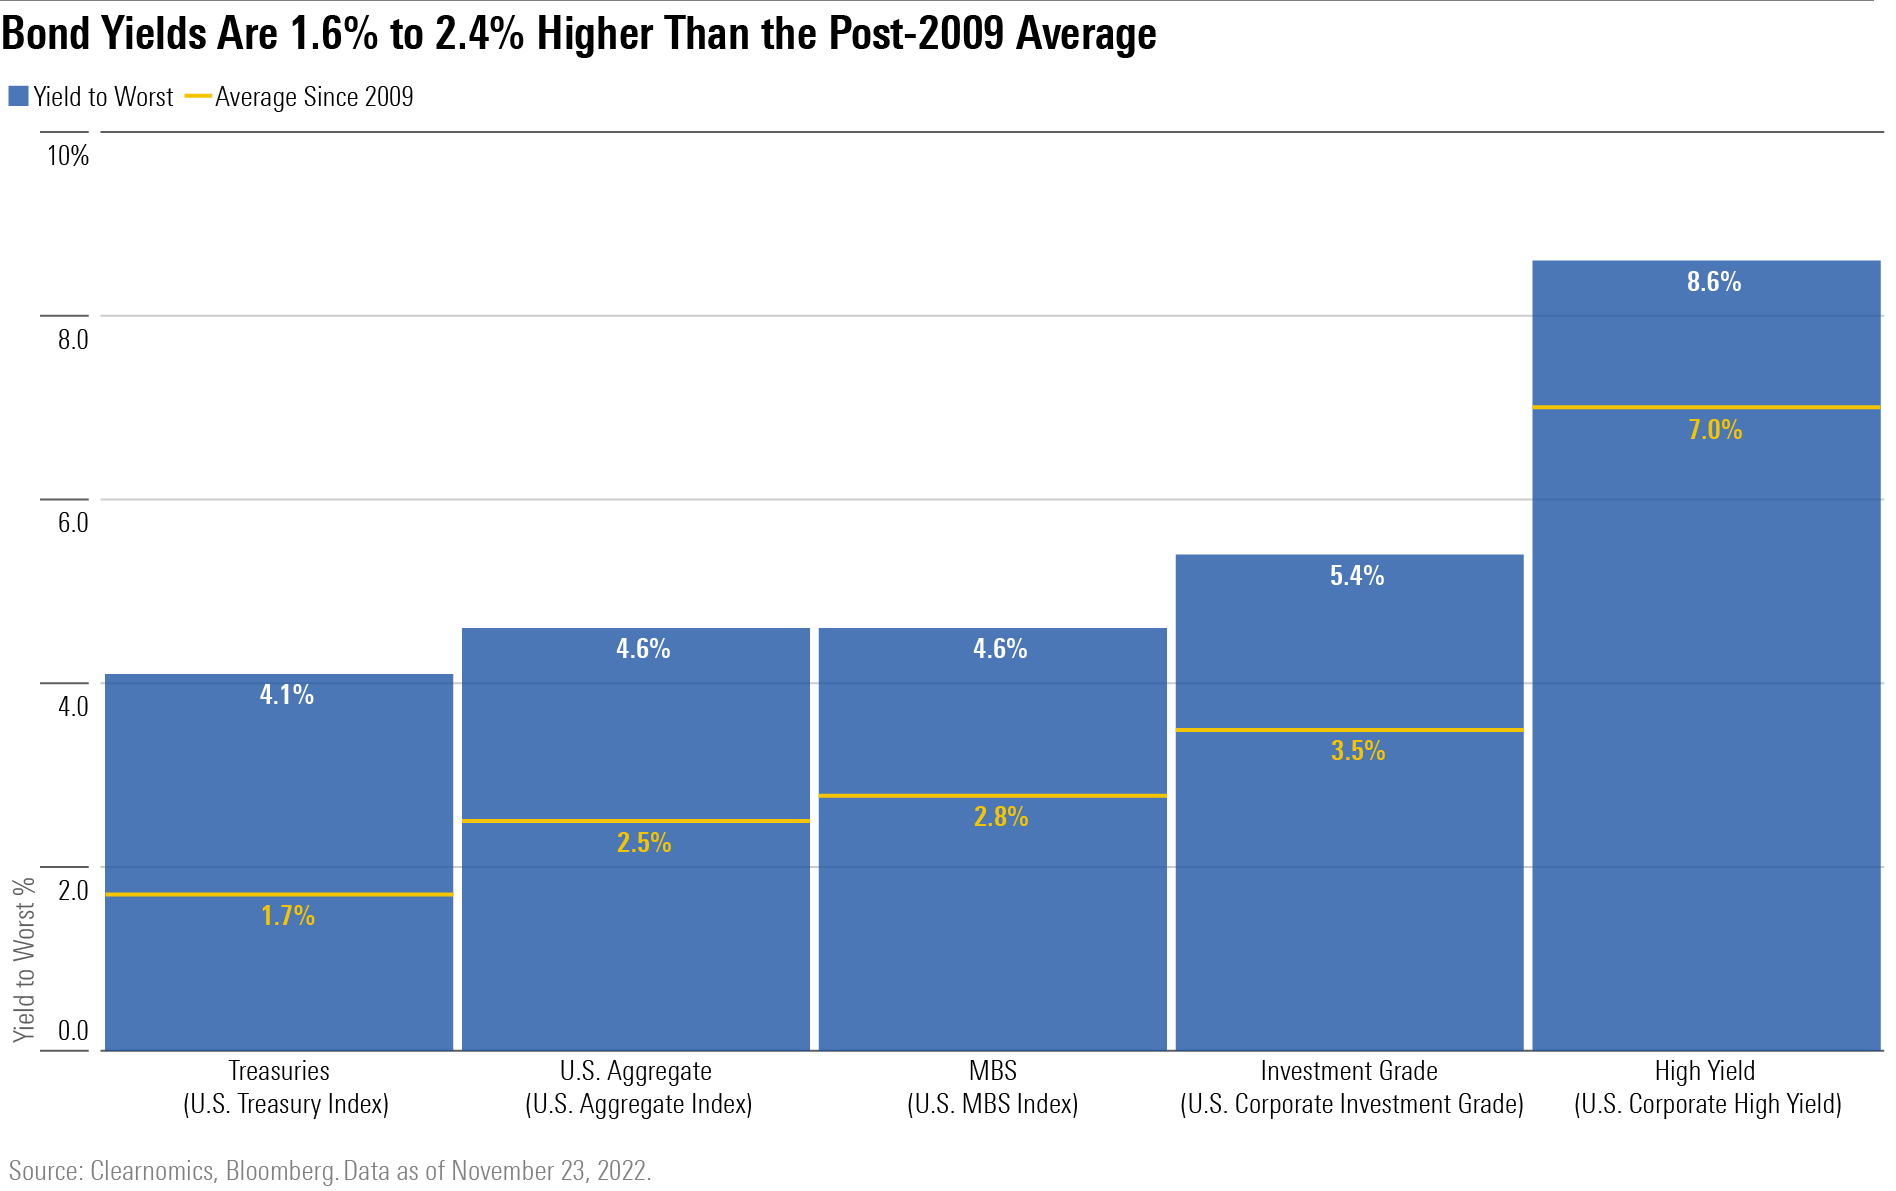 A bar chart showing bond yields as of the end of 2022 versus their post-2009 average.